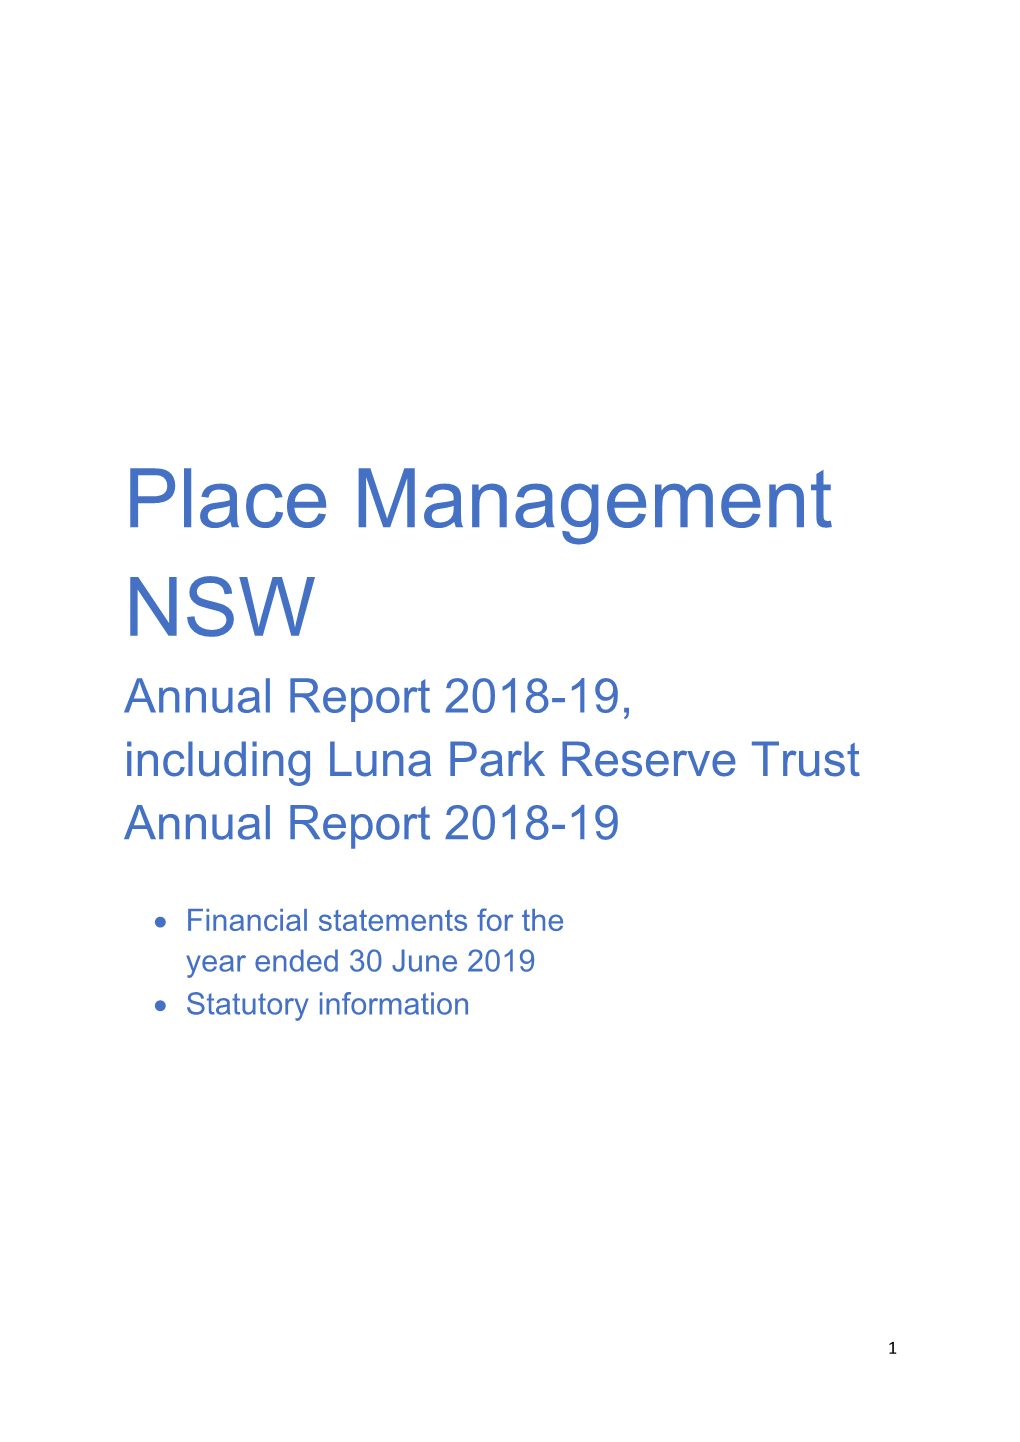 Place Management NSW Annual Report 2018-19, Including Luna Park Reserve Trust Annual Report 2018-19